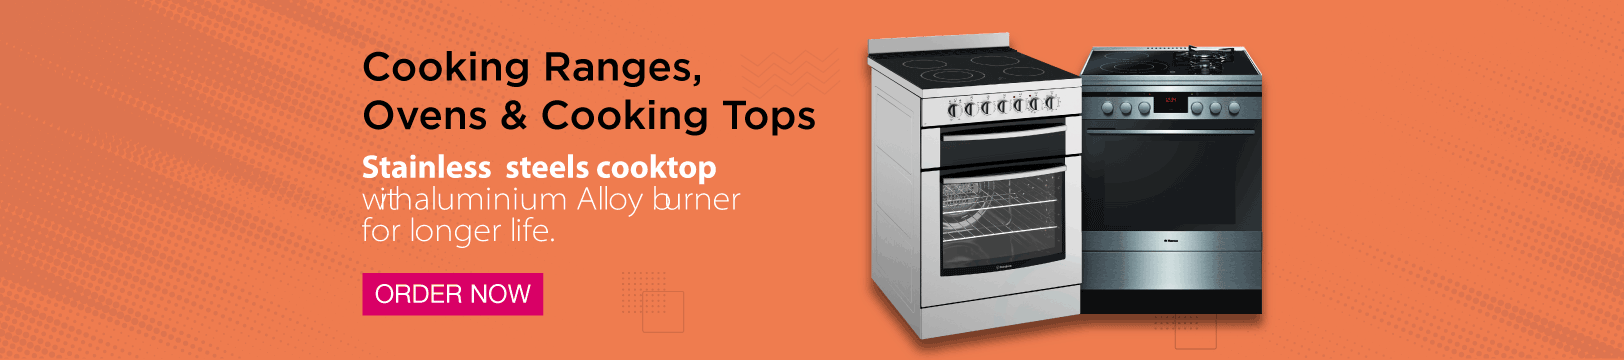 Cooking Ranges, Ovens & Cooking Tops